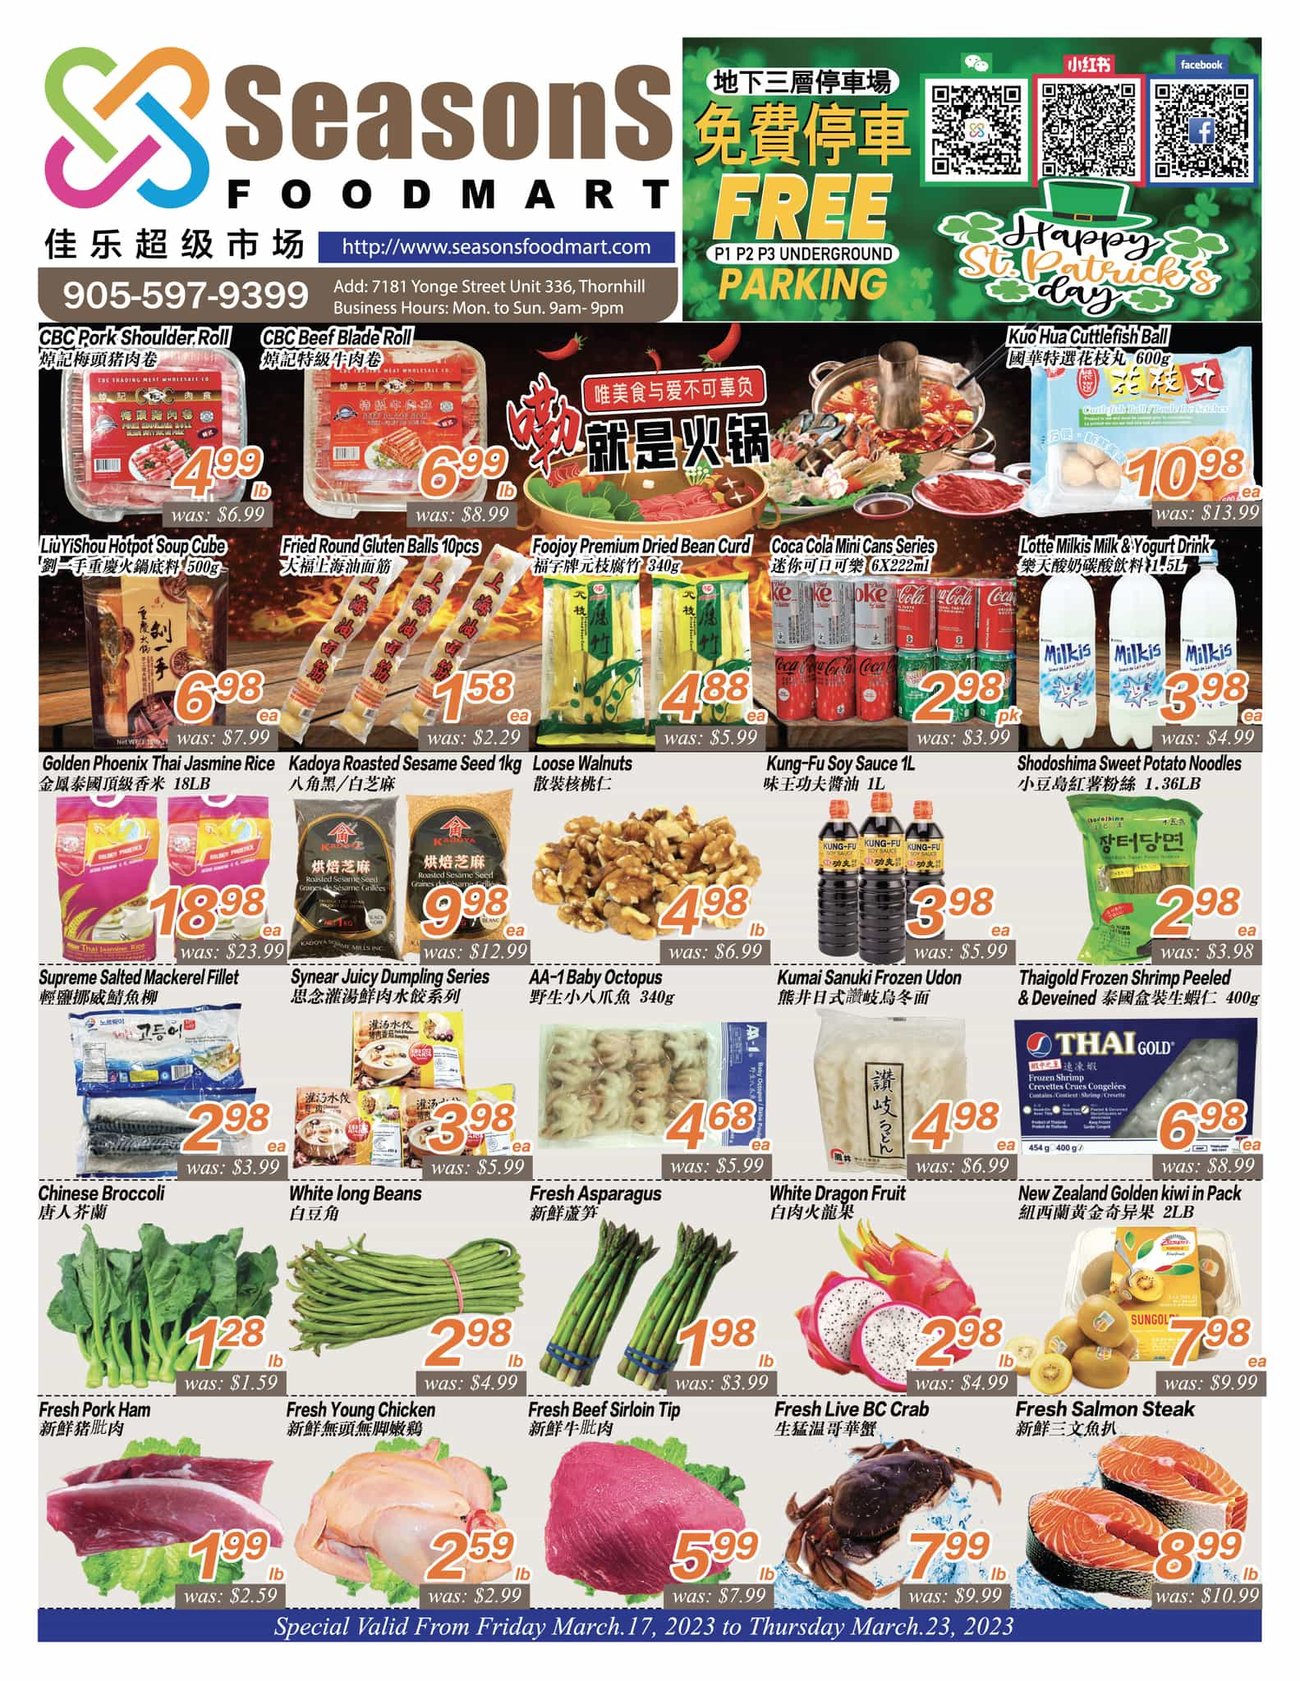 Seasons Foodmart - Thornhill - Weekly Flyer Specials - Page 1